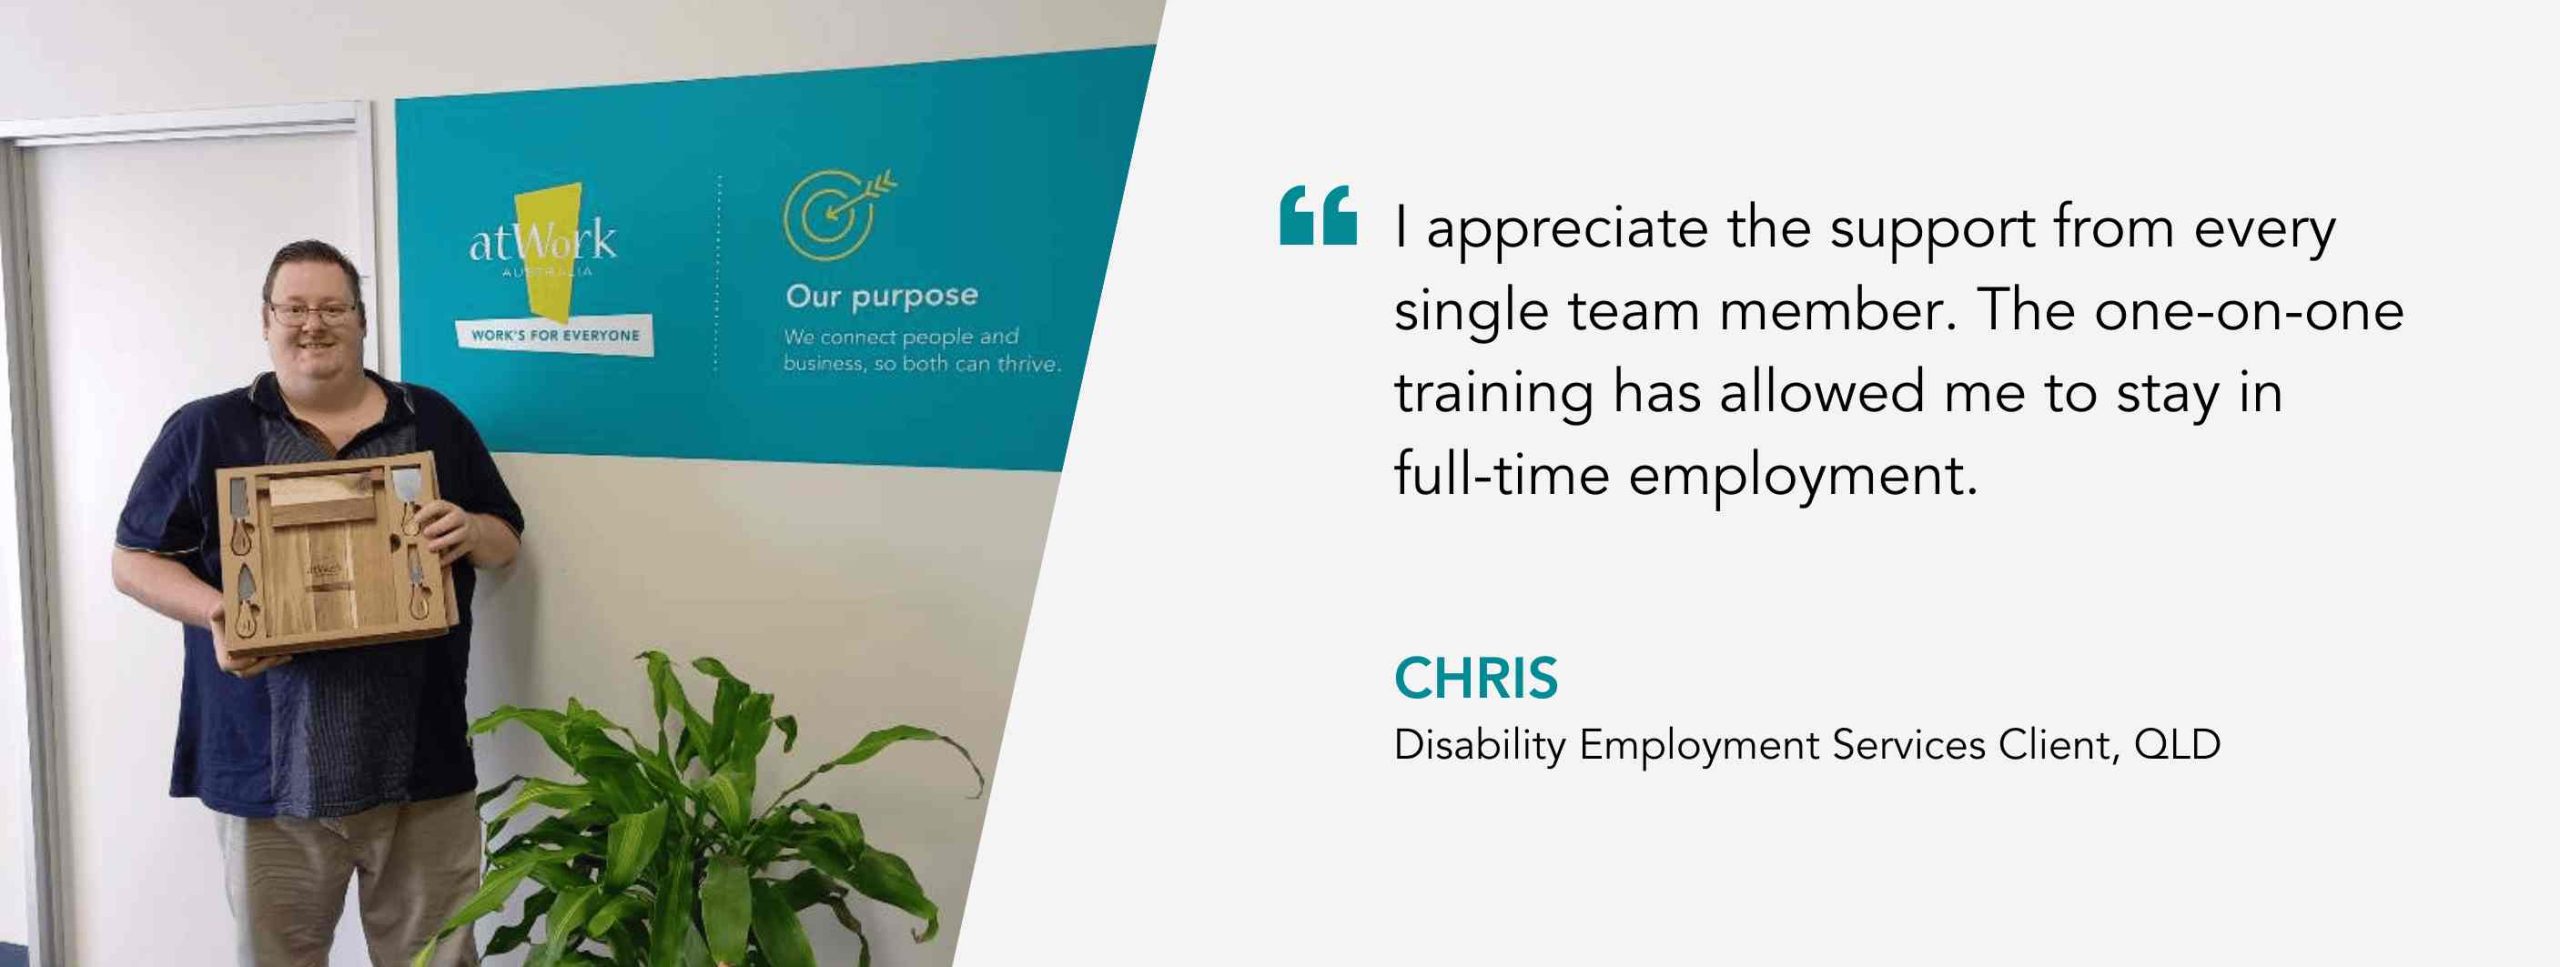 I appreciate the support from every single team member. The one-on-one training has allowed me to stay in full-time employment. Chris, Disability Employment Services Client, QLD